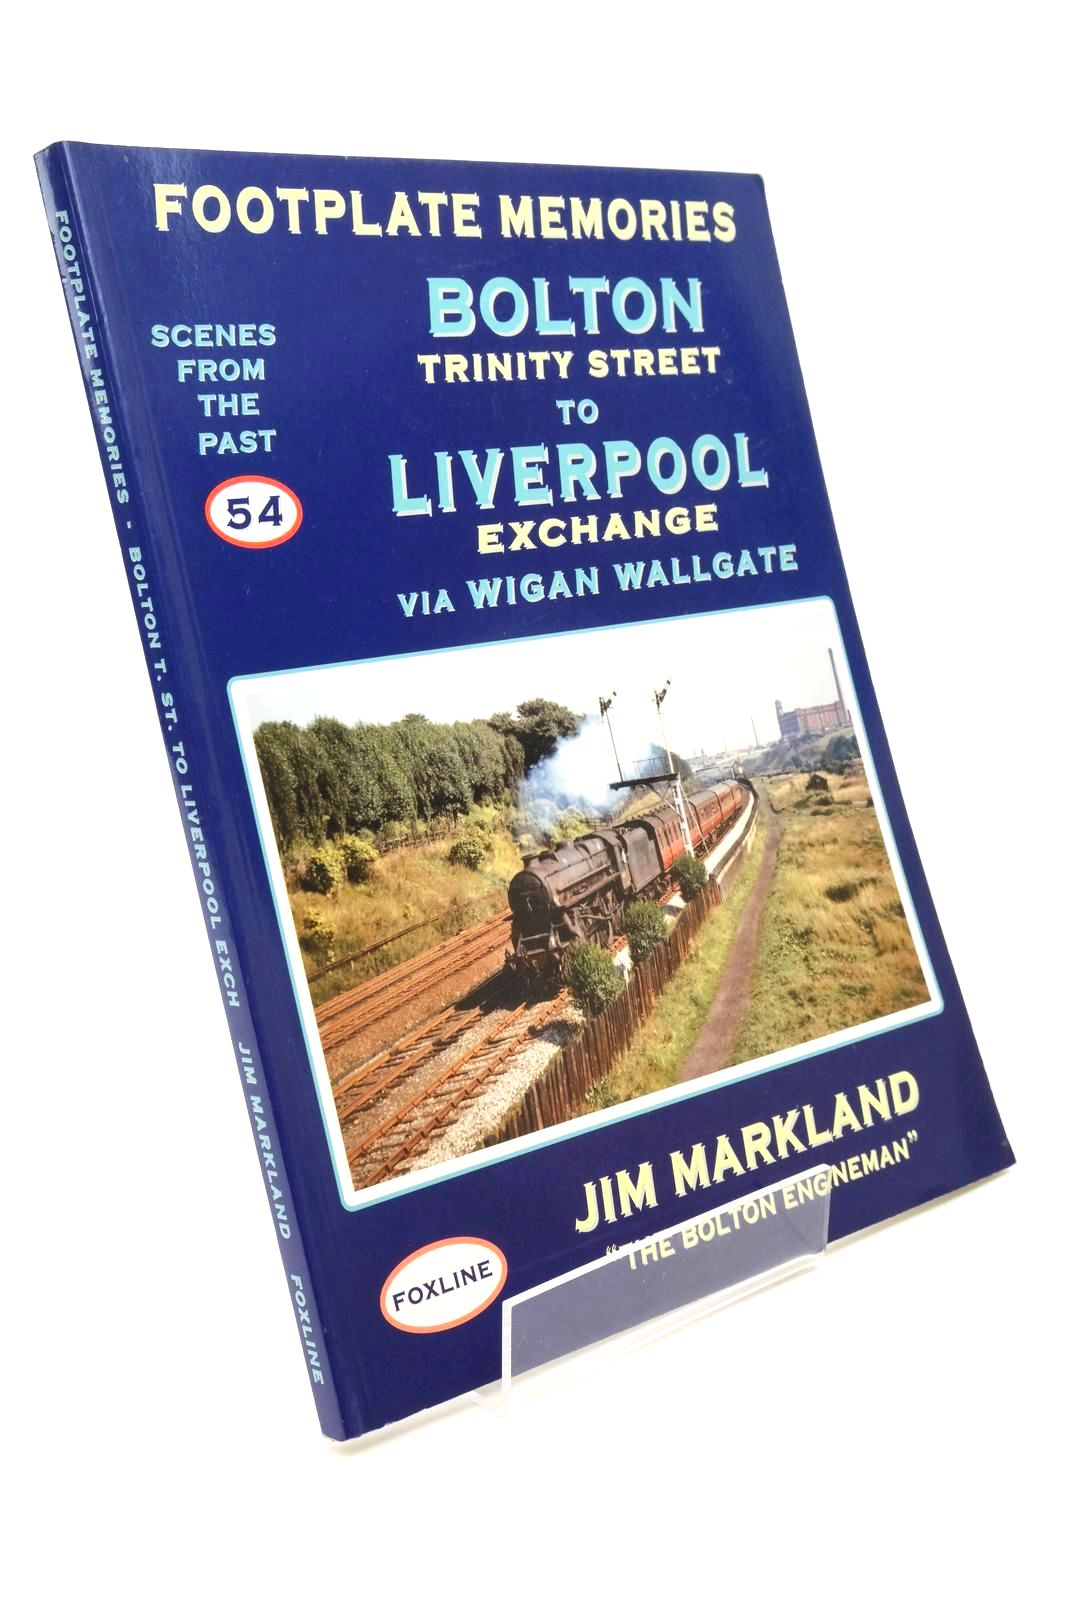 Photo of FOOTPLATE MEMORIES: BOLTON TRINITY STREET TO LIVERPOOL EXCHANGE VIA WIGAN WALLGATE written by Markland, Jim published by Foxline (STOCK CODE: 1322462)  for sale by Stella & Rose's Books